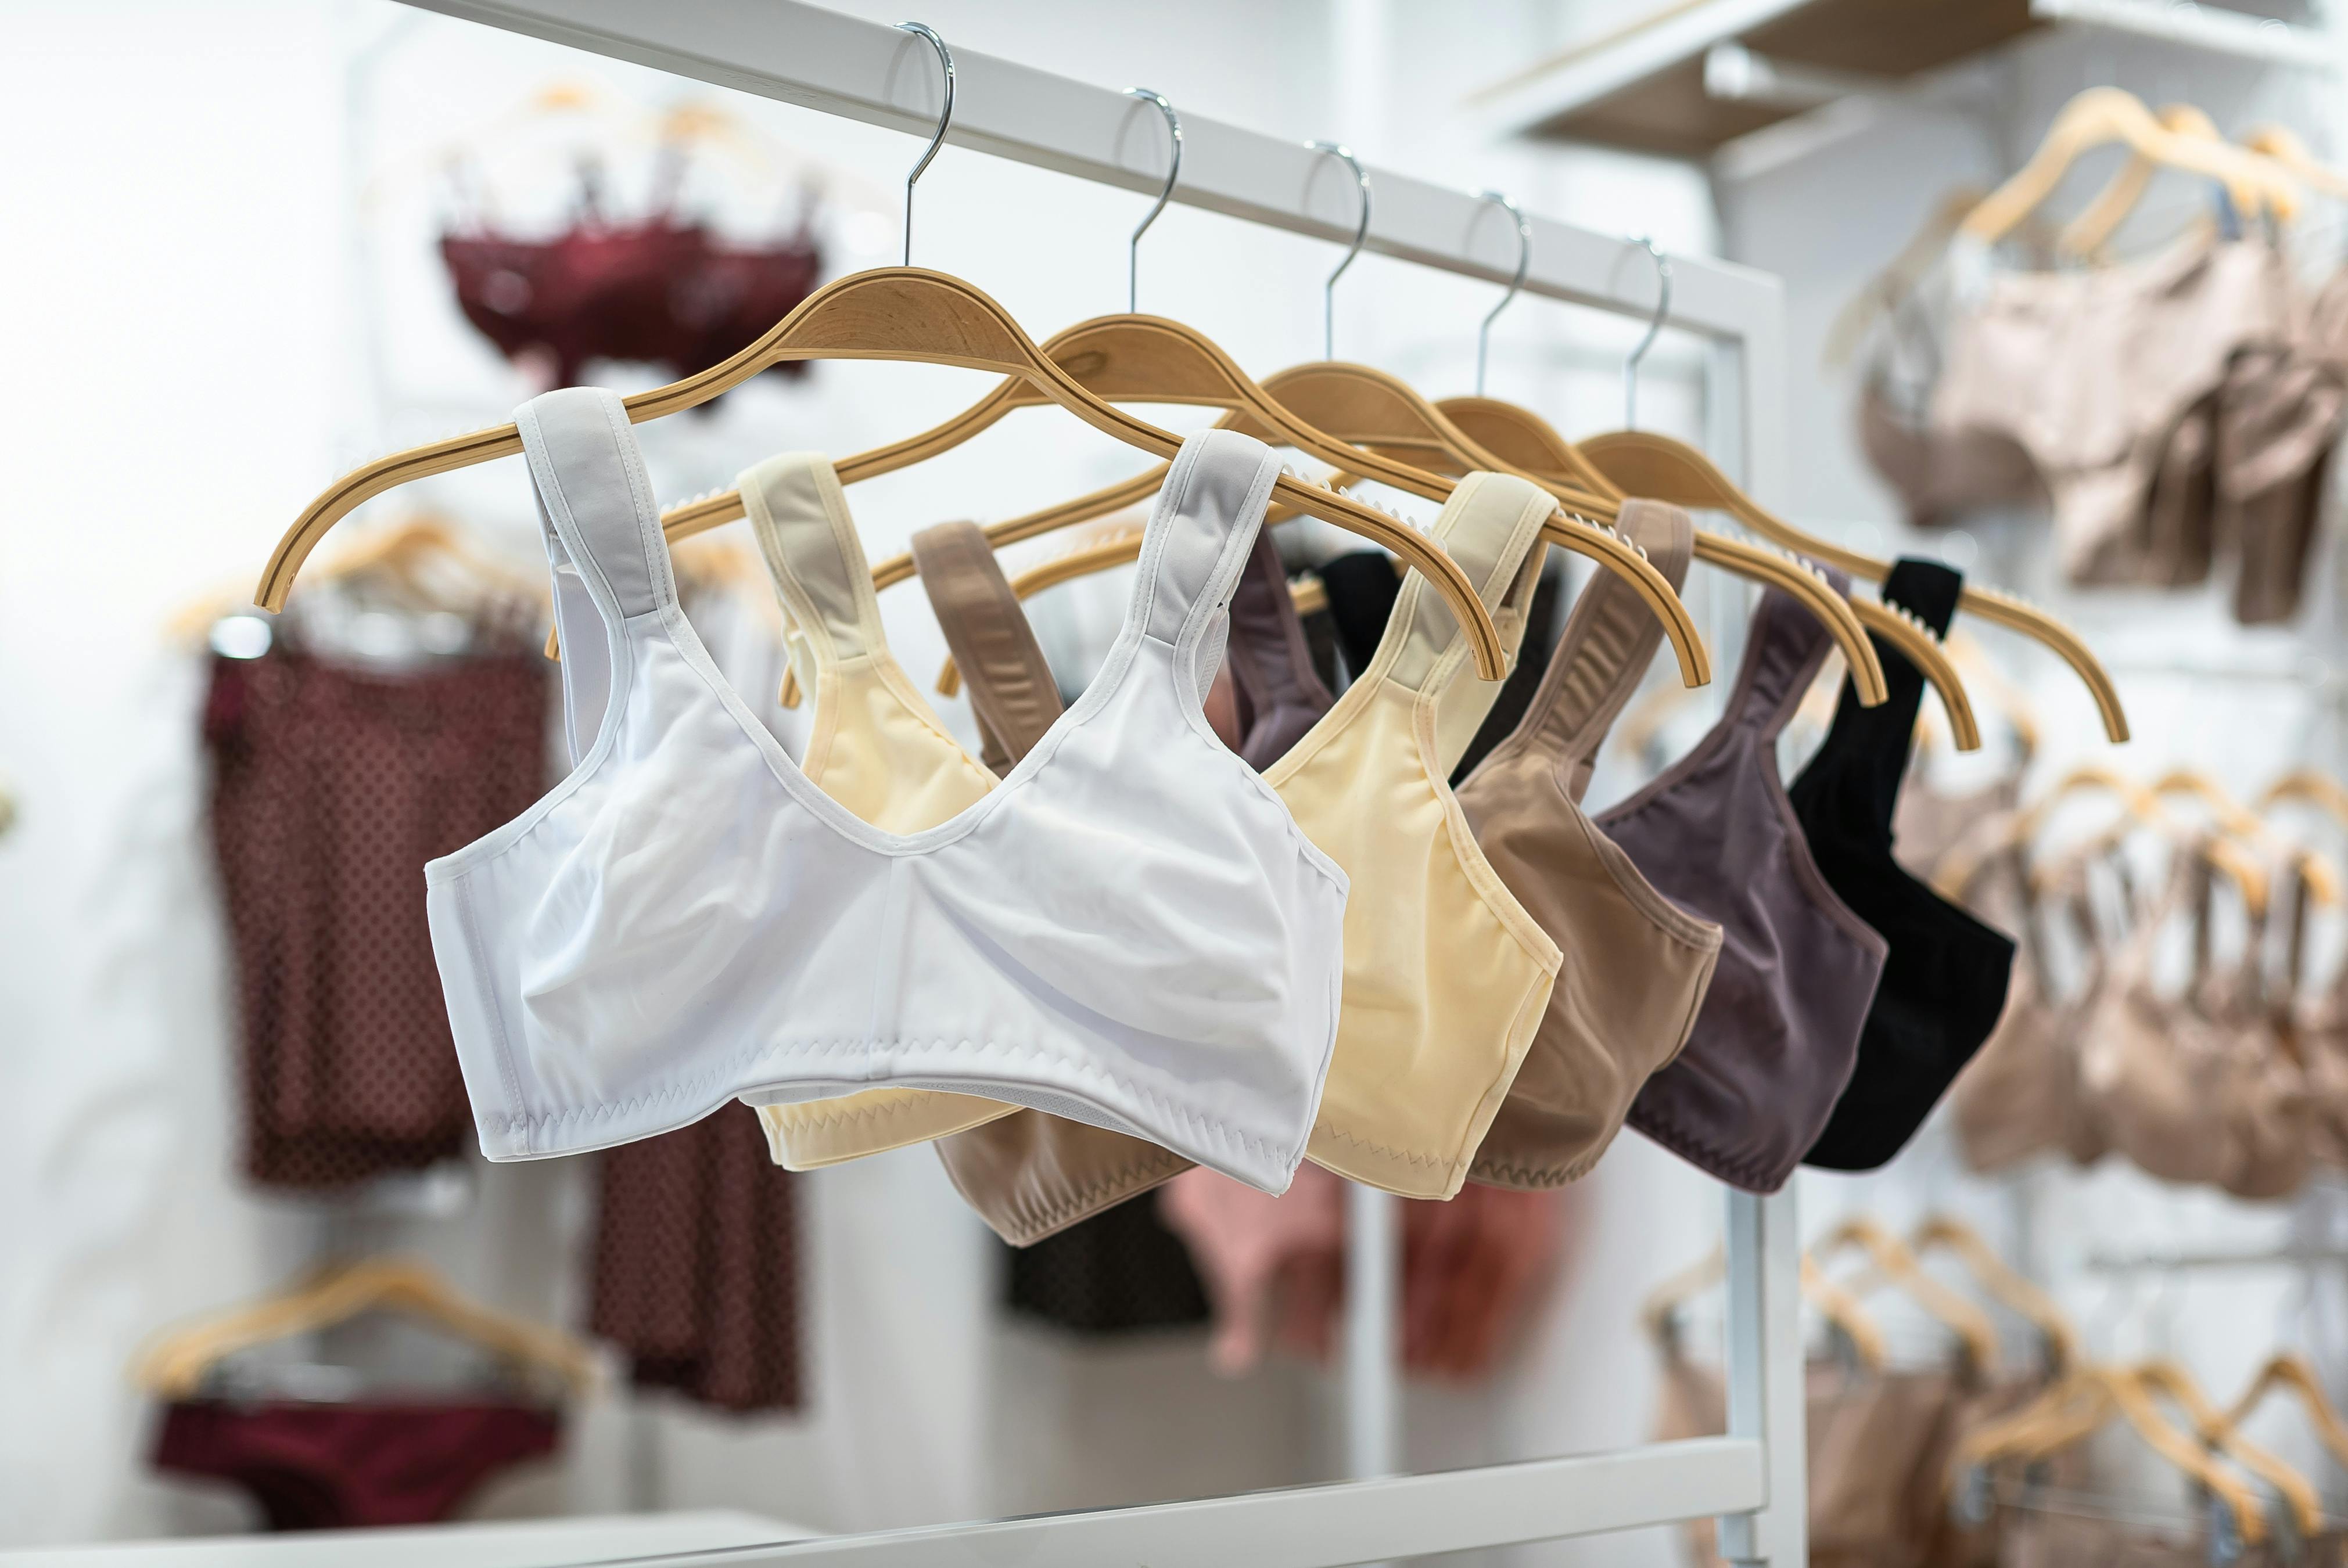 Wall Bras Bras On Sale Clothing Market Stock Photo, Picture and Royalty  Free Image. Image 20889673.